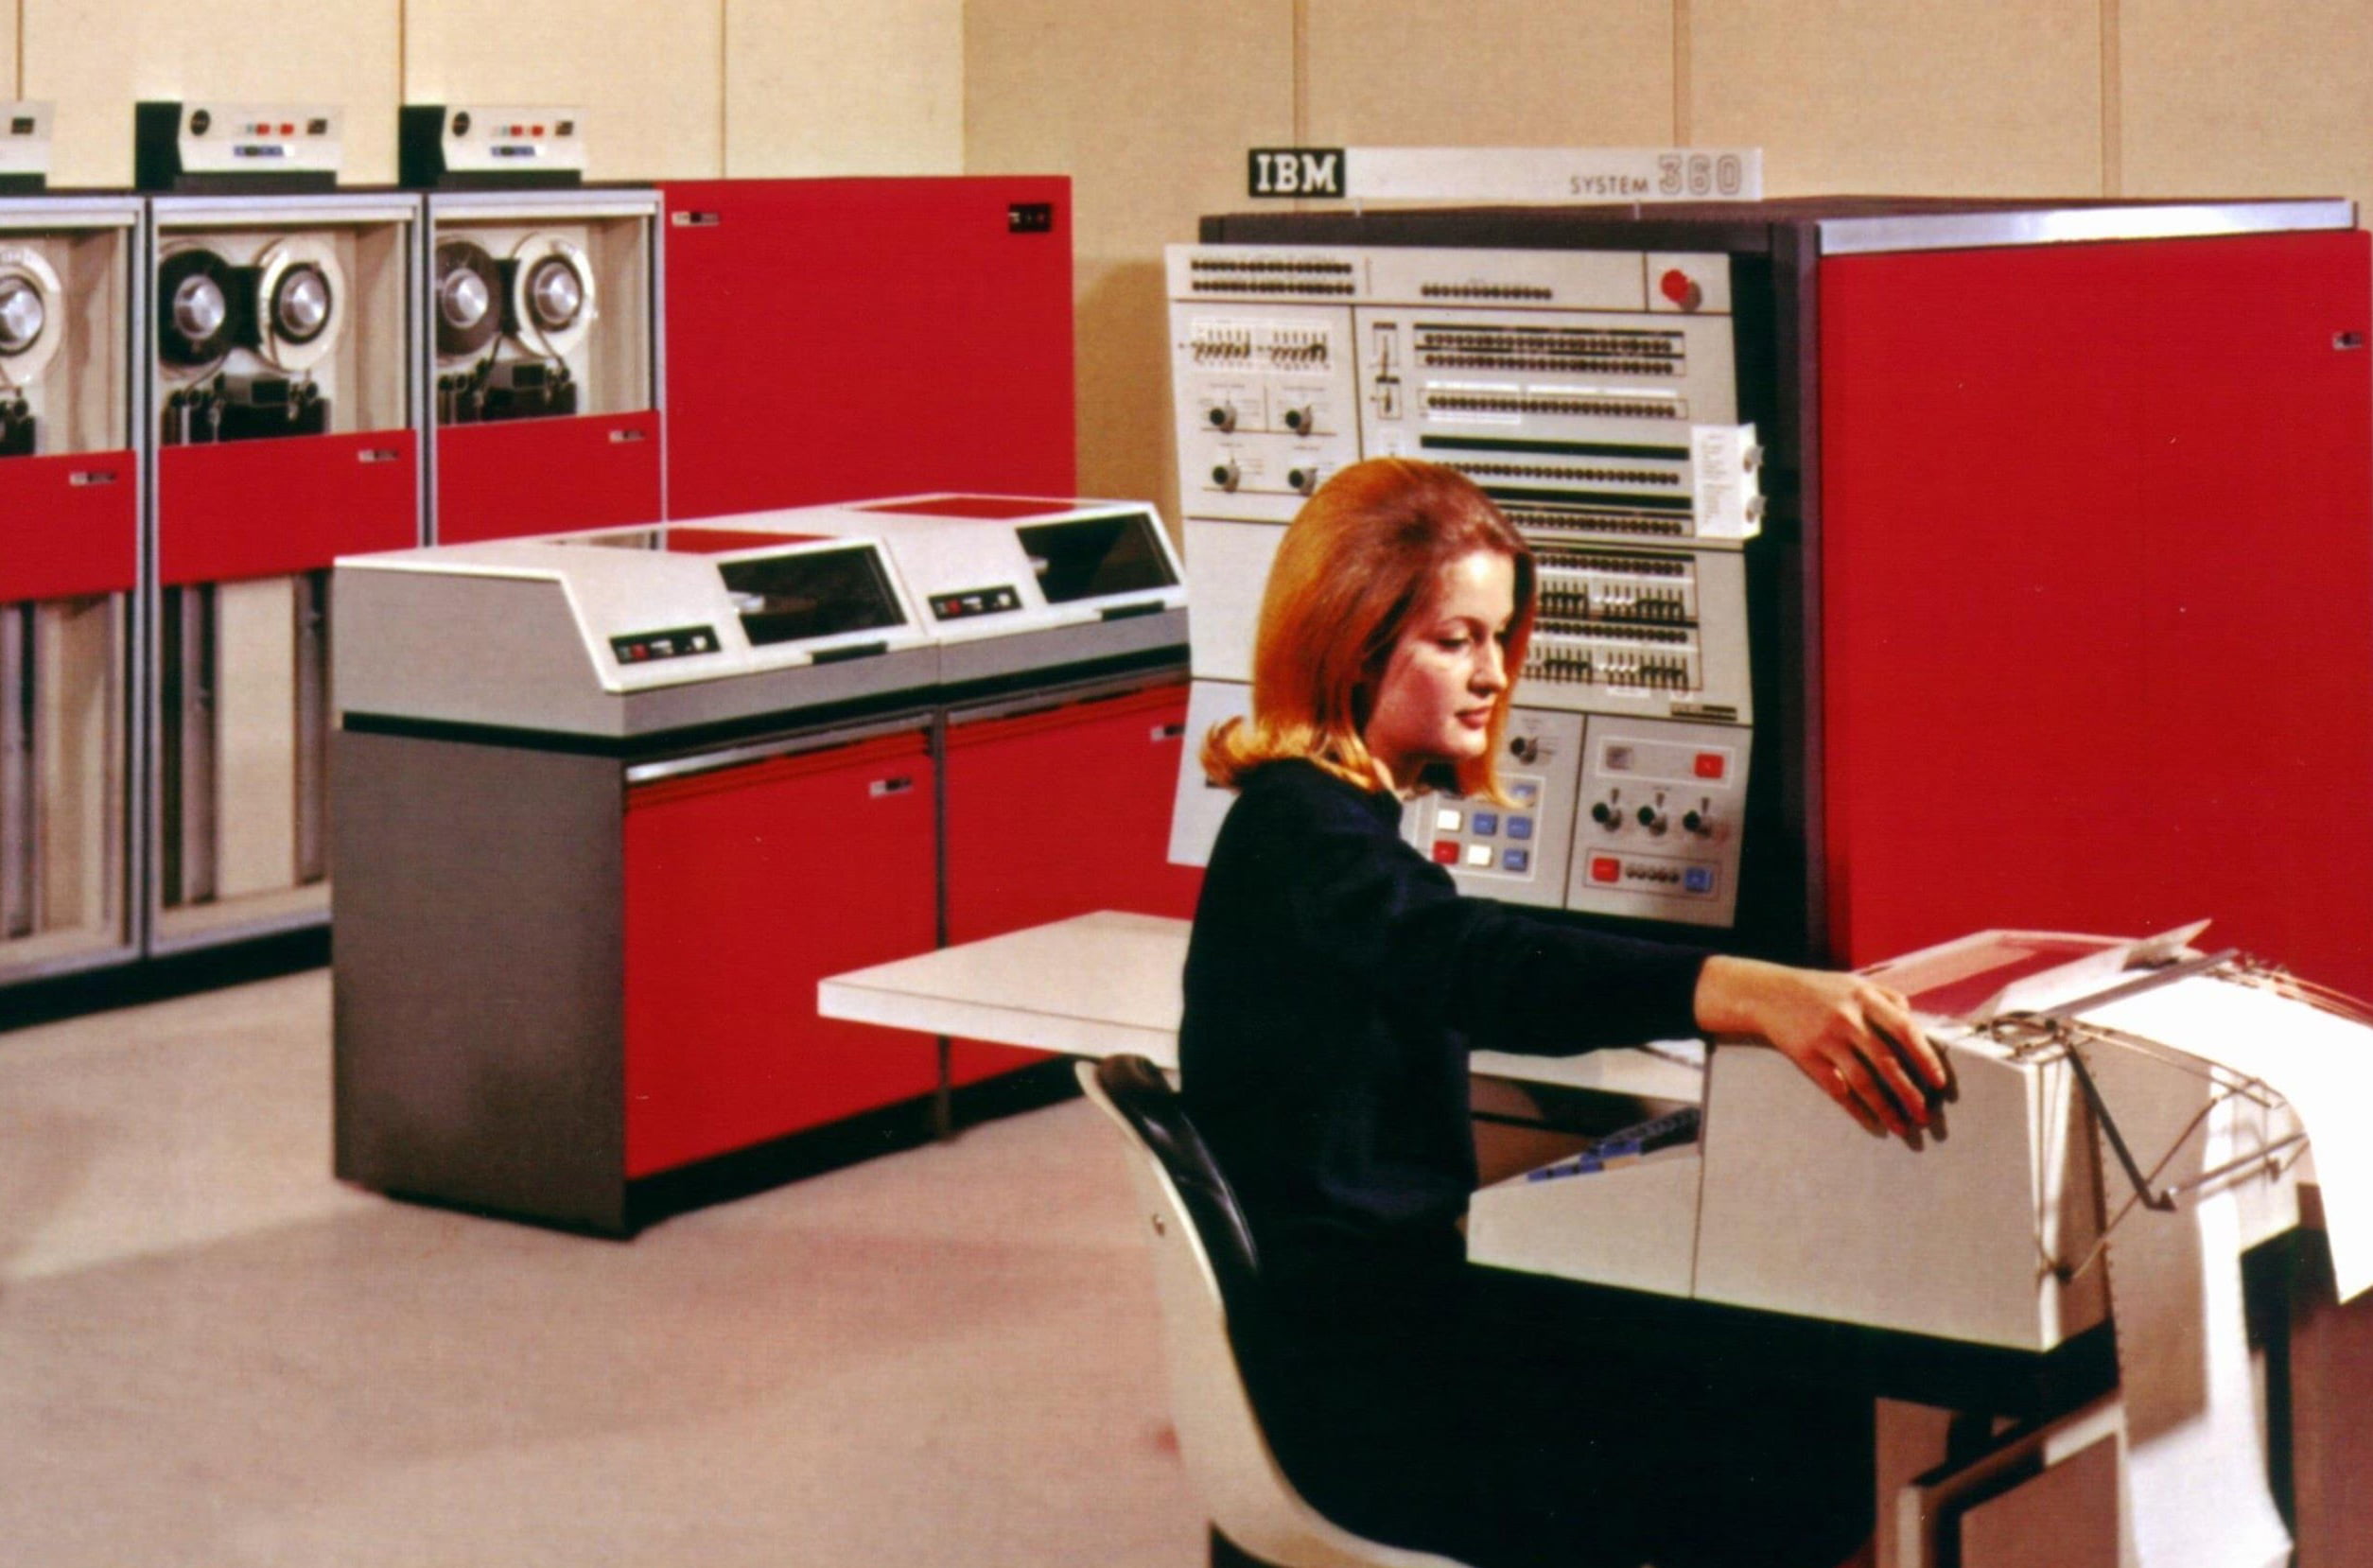 Old photo of woman working with old IBM mainframe